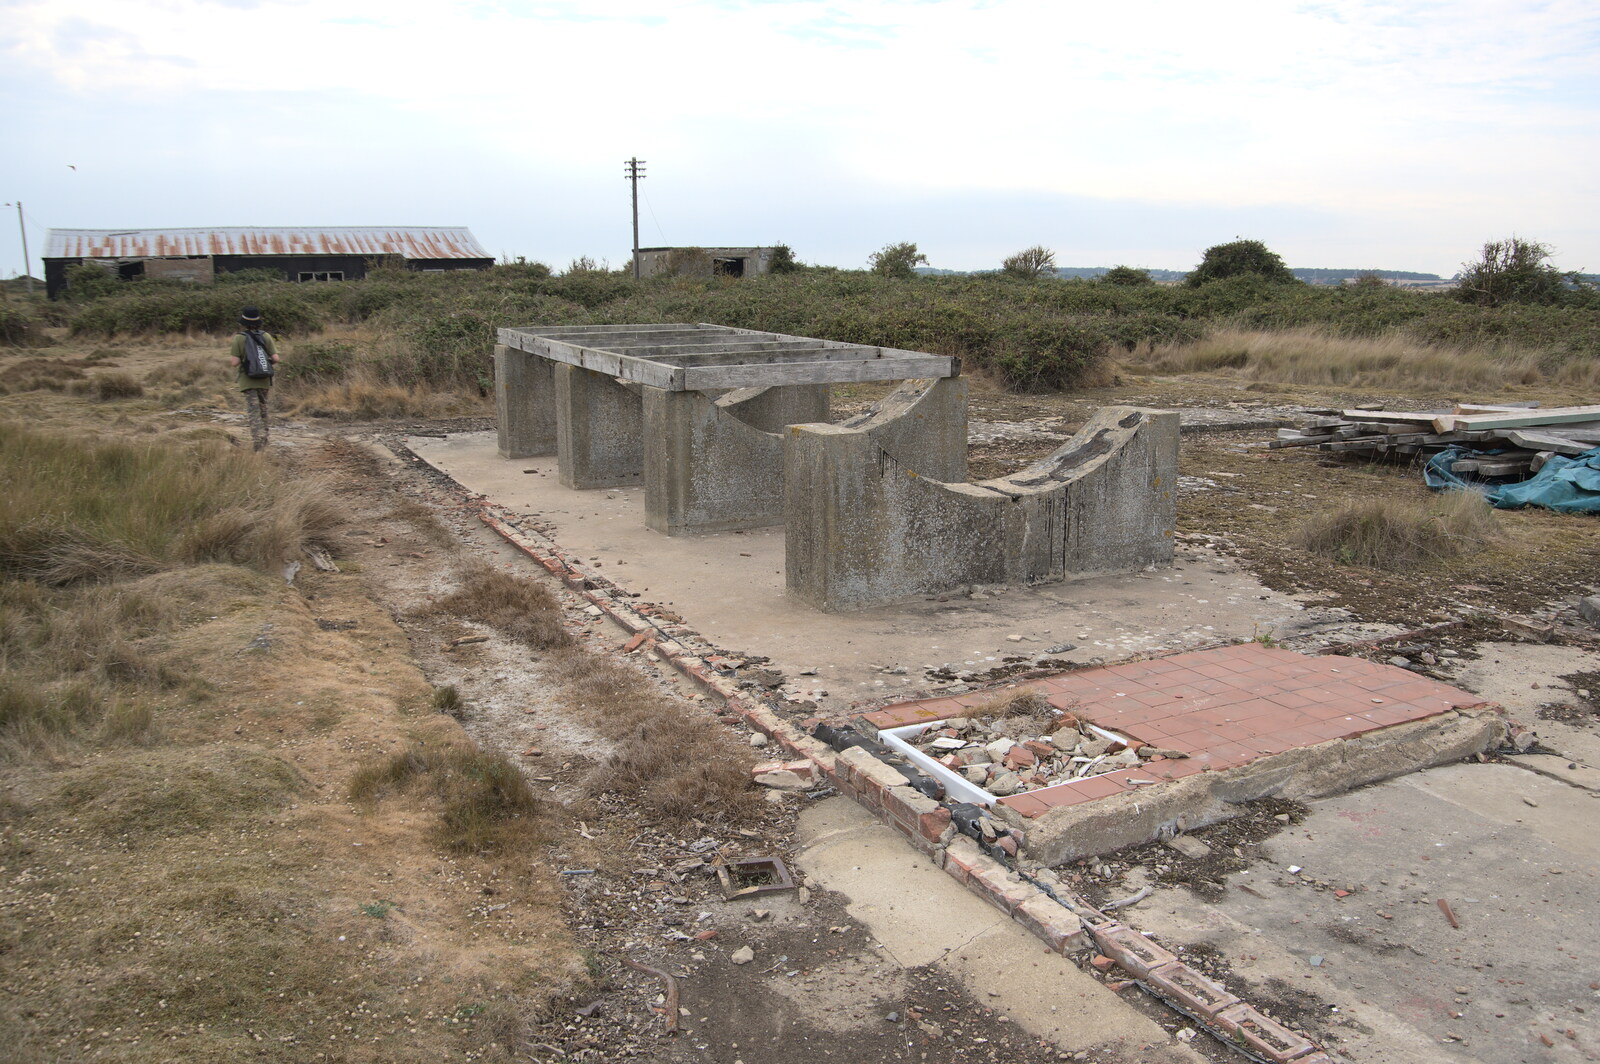 An old shower and a big concrete tank stand from A Trip to Orford Ness, Orford, Suffolk - 16th August 2022